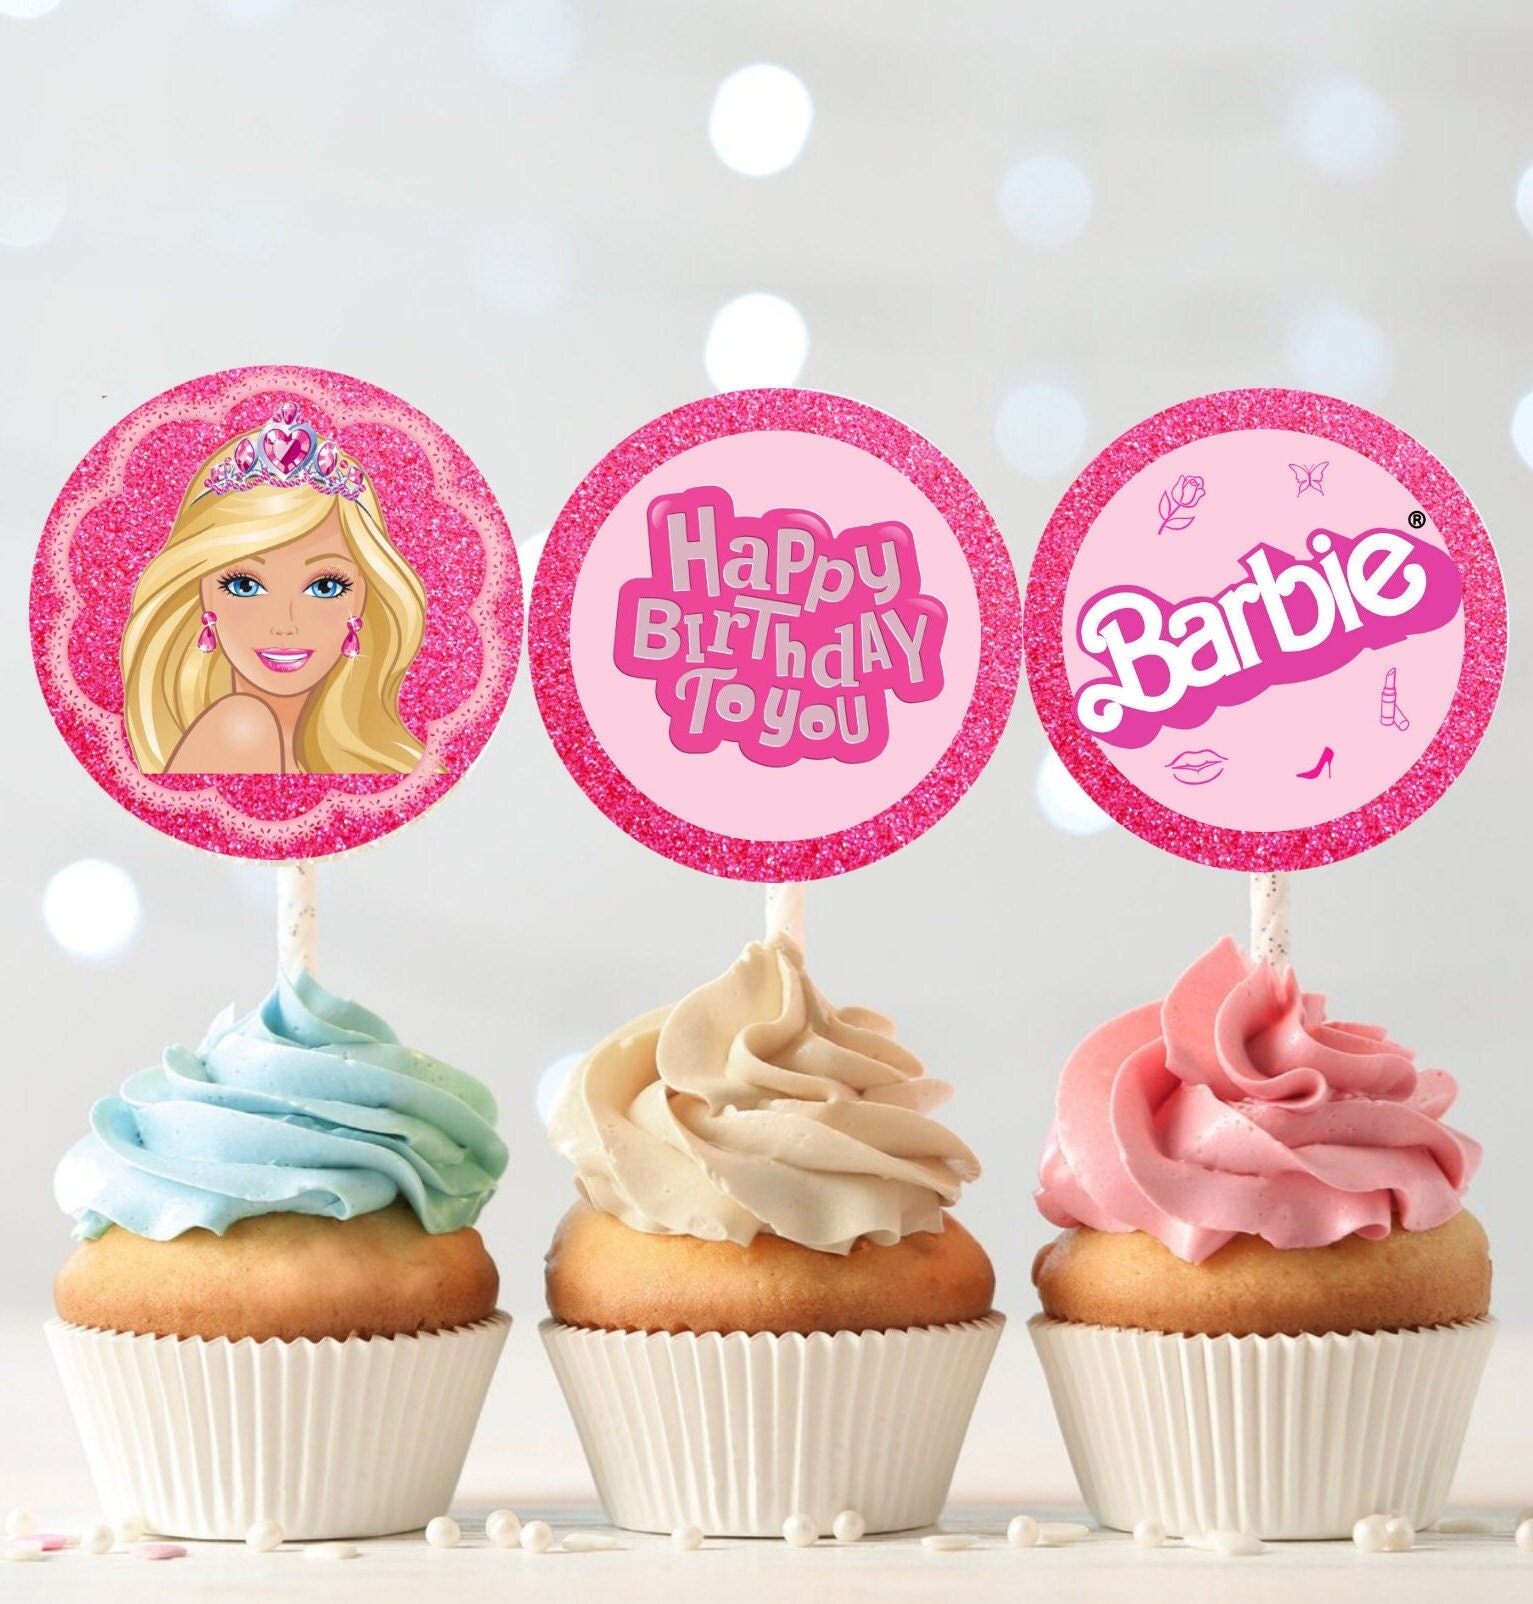 Barbie Cupcake & Cake Decoration Toppers 12 ct 